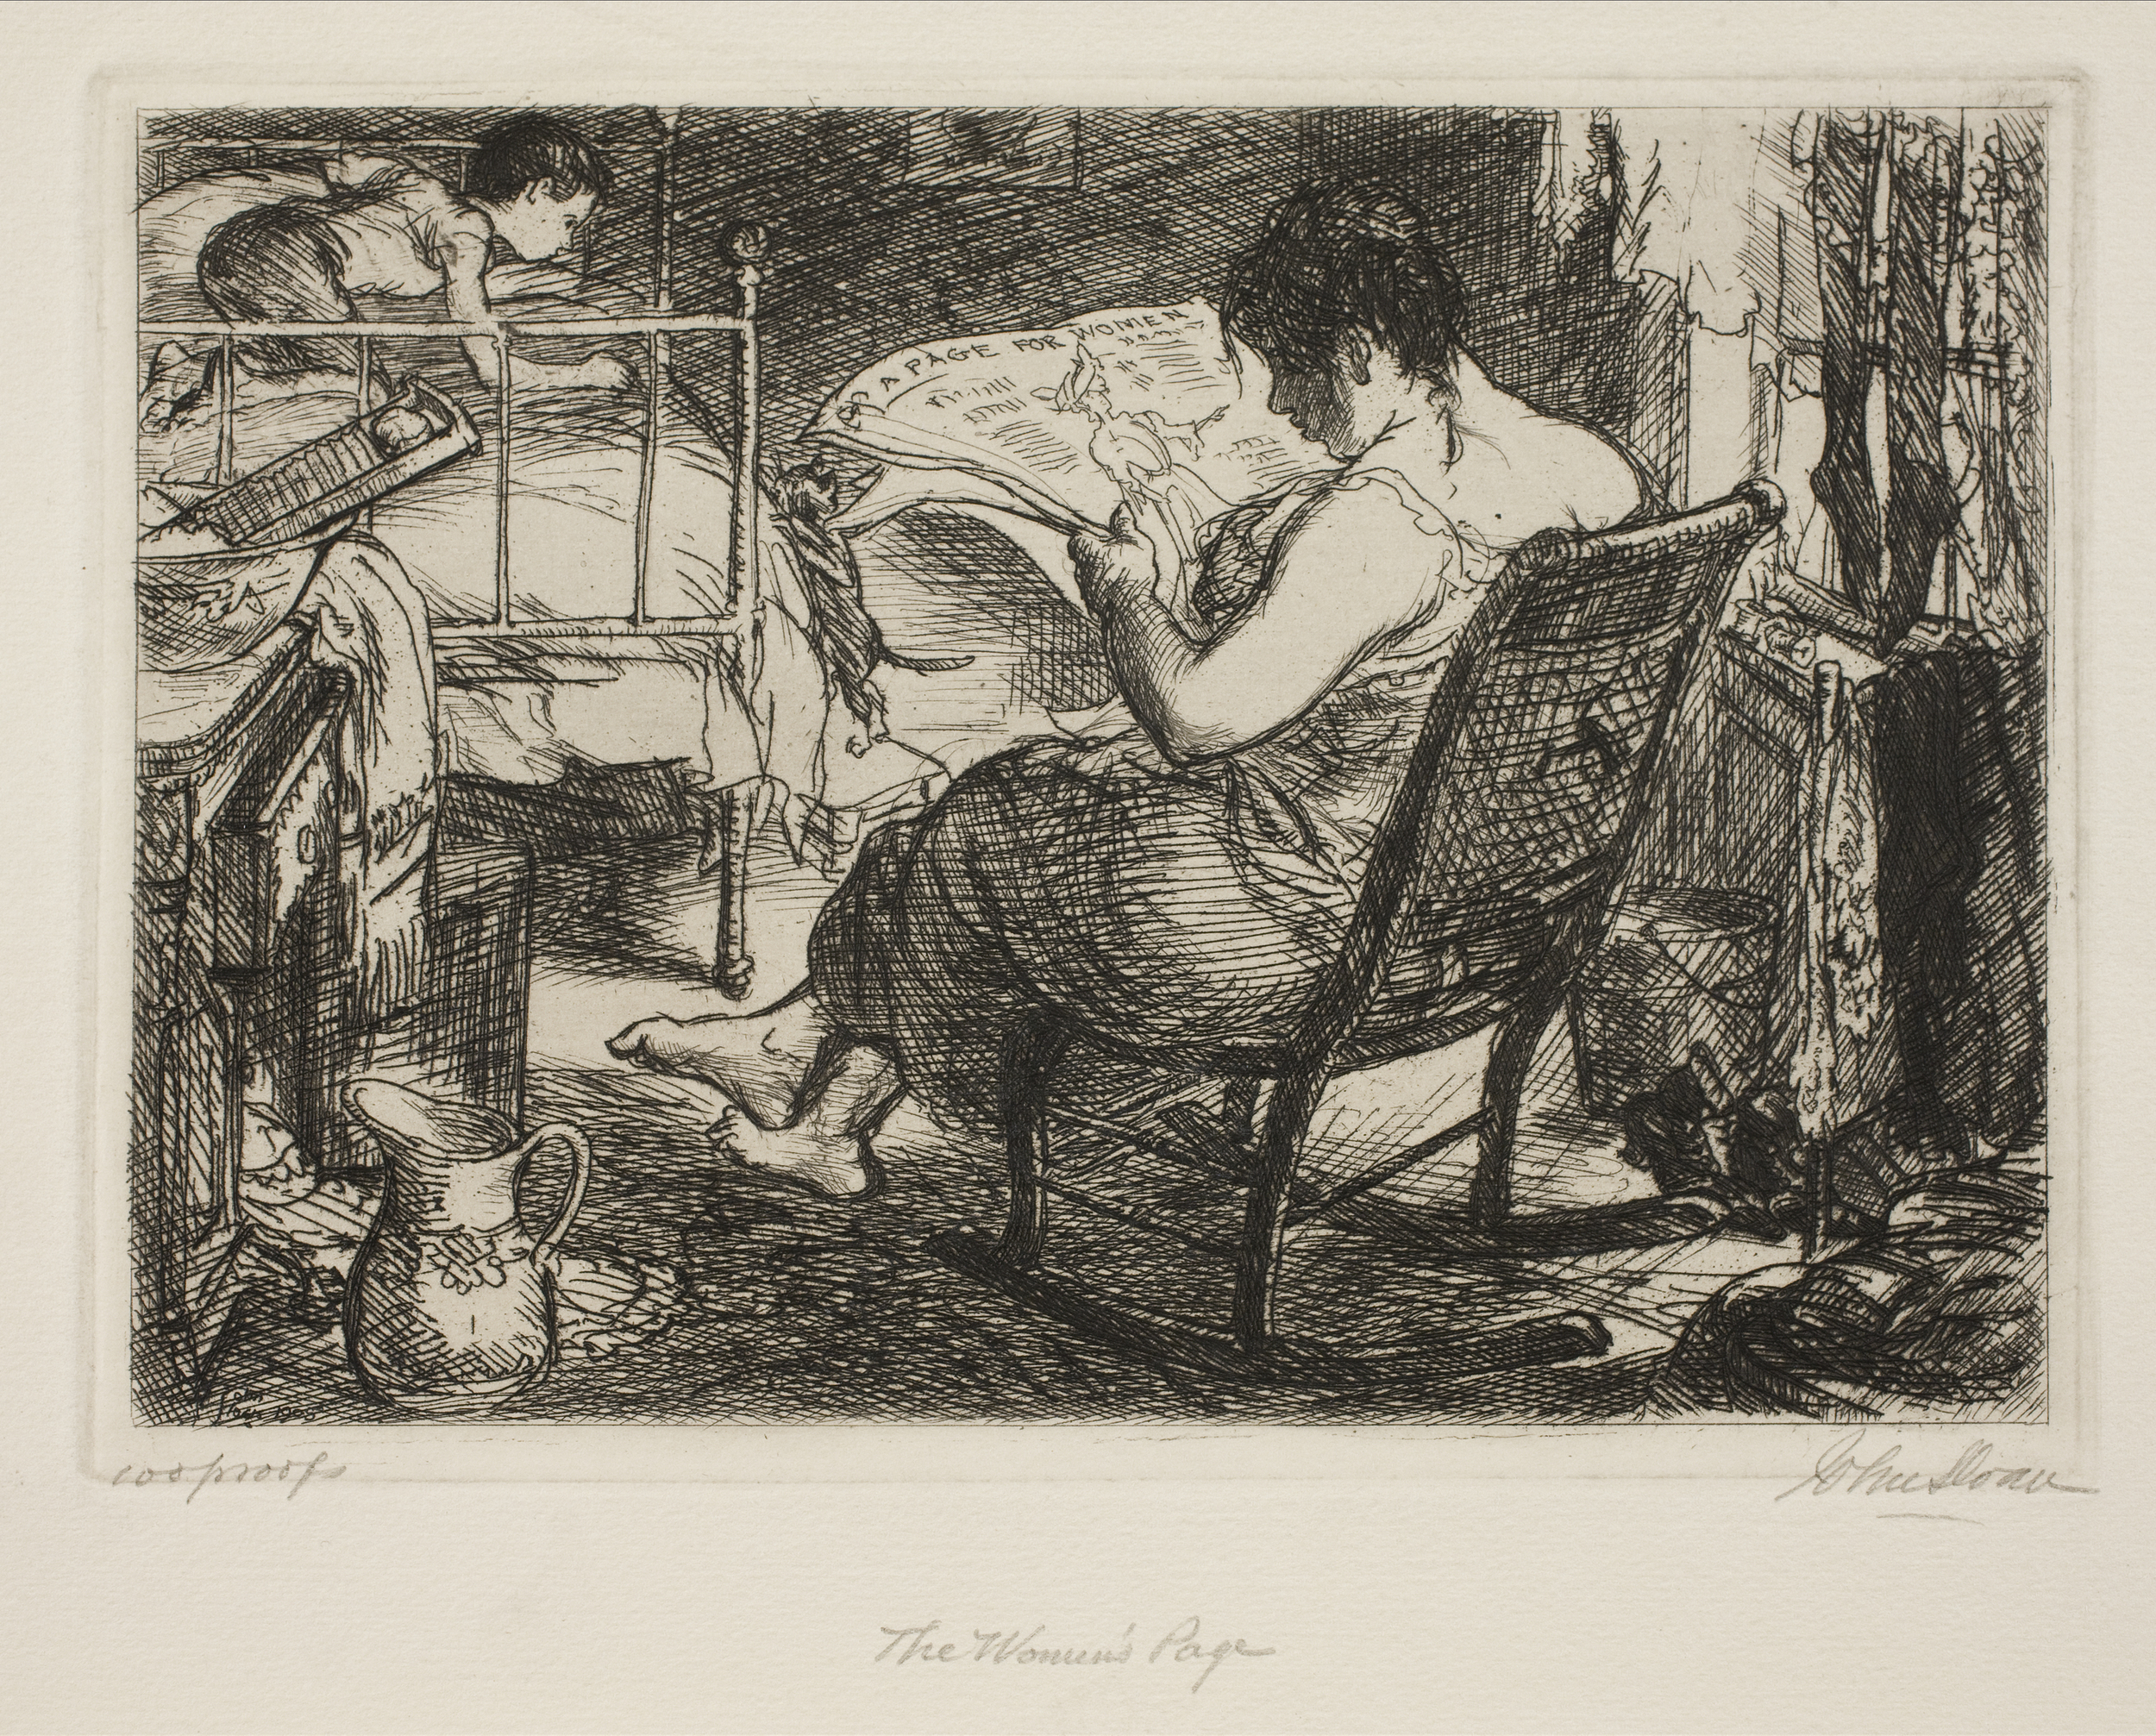 Etching of woman reading the newspaper in a rocking chair while child plays on bed with the cat